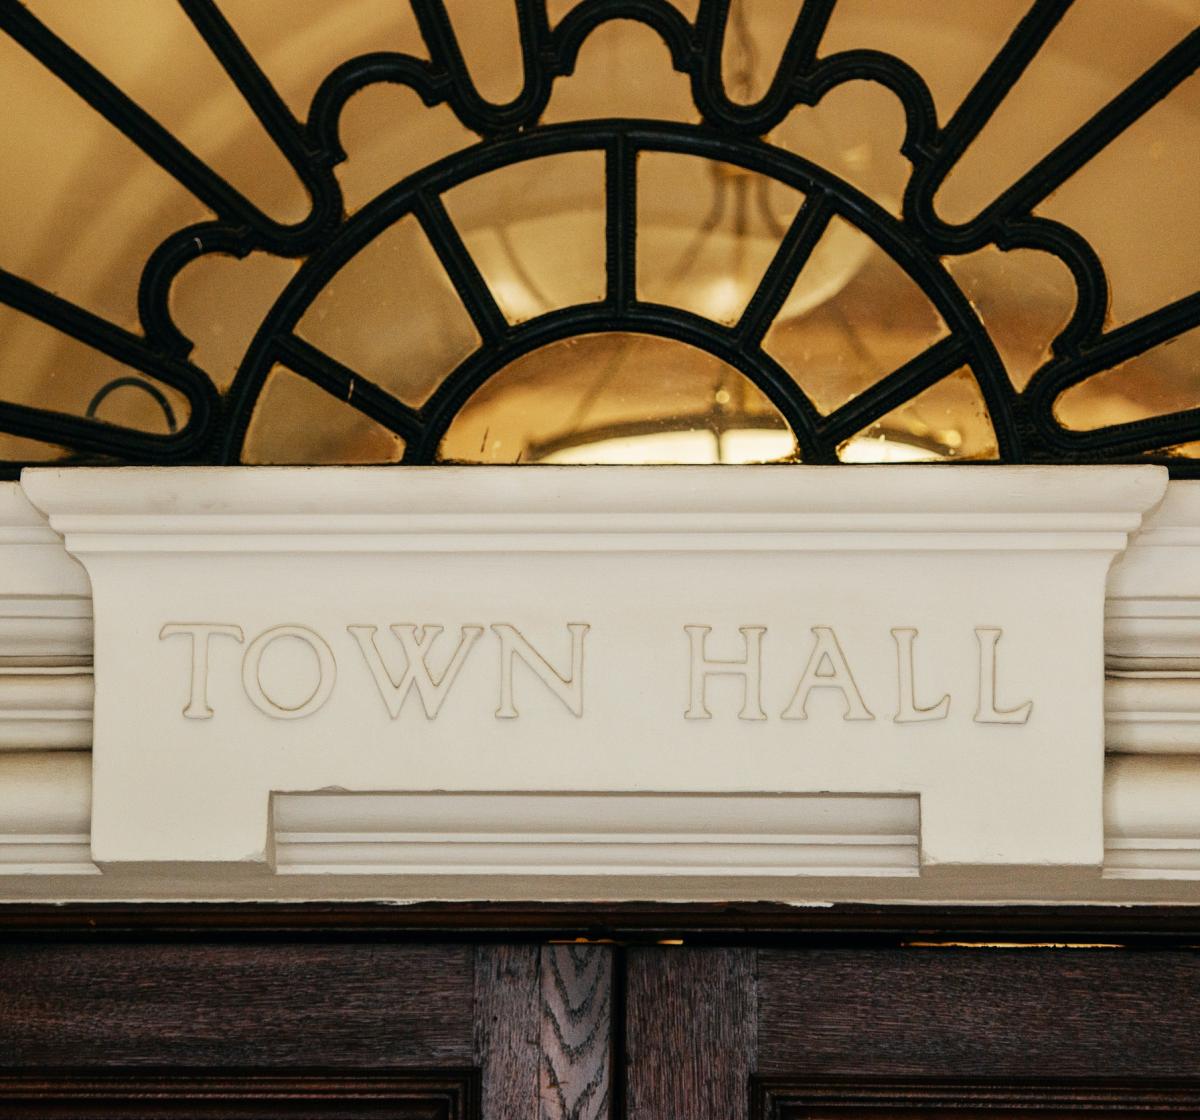 Photo of a town hall doorframe with the words Town Hall written on it.